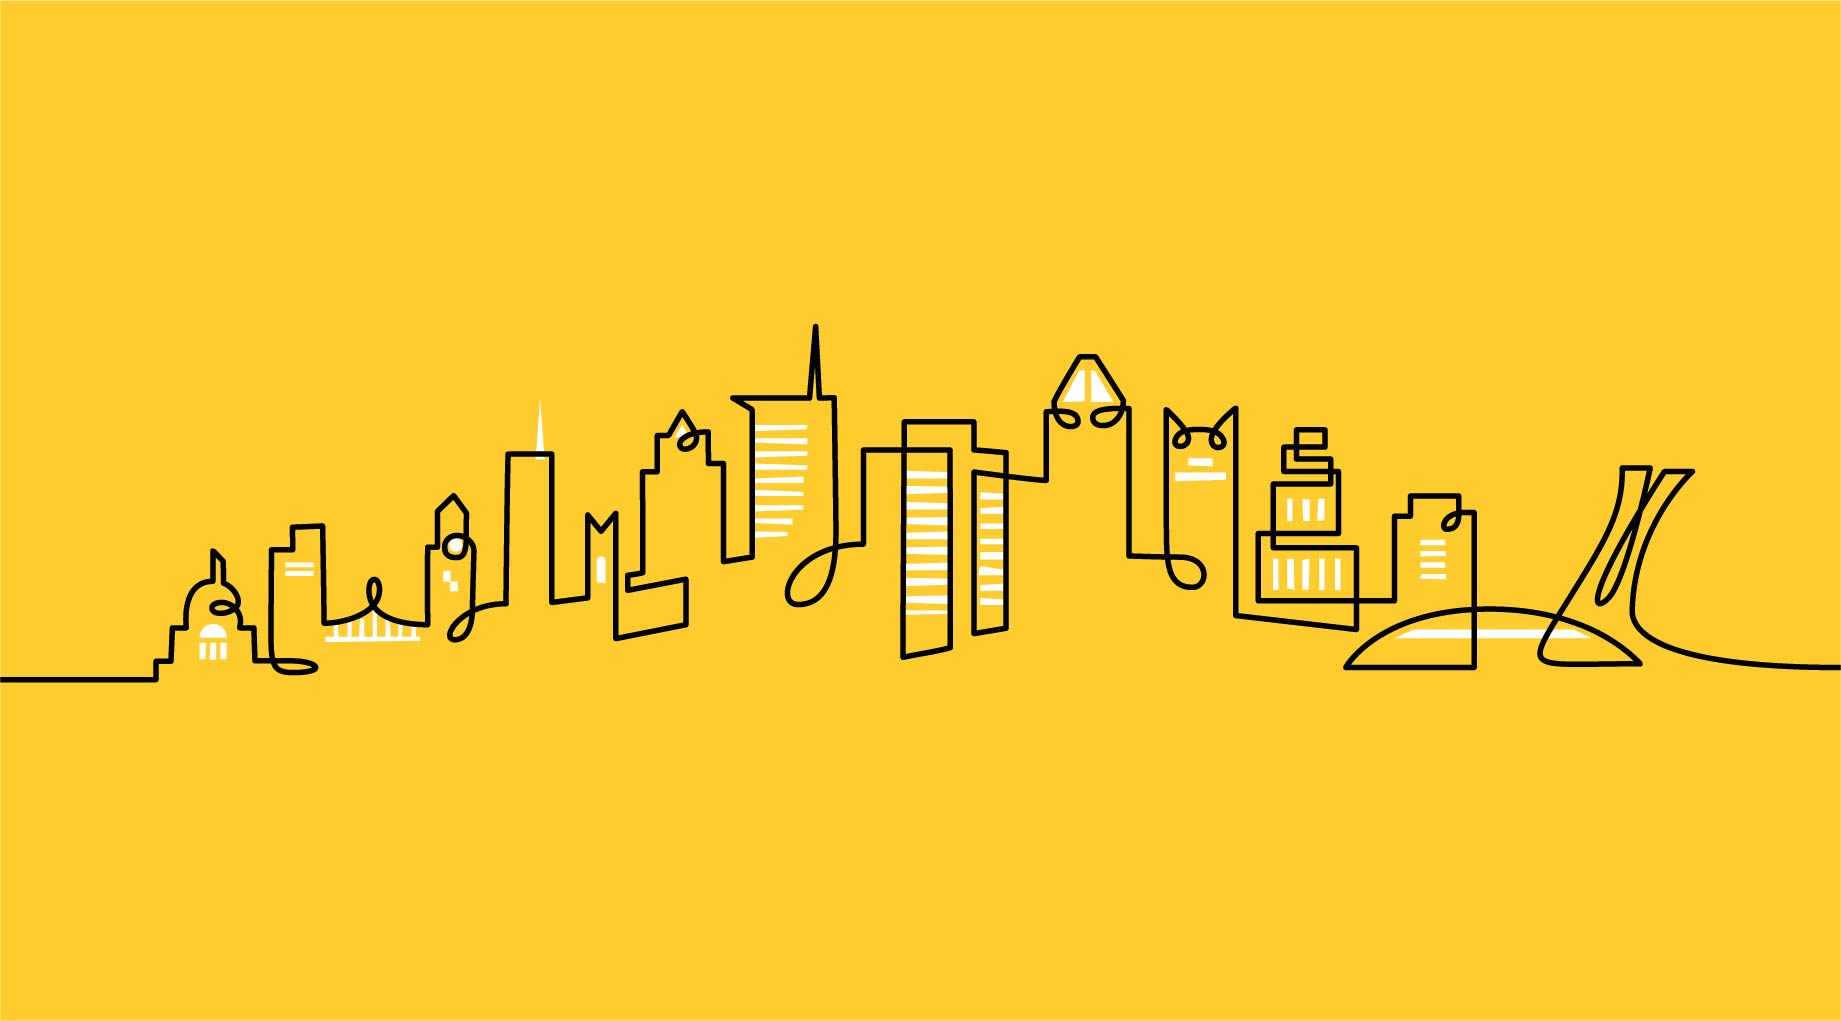 Yellow Pages Montreal Cityscape illustration by Loogart